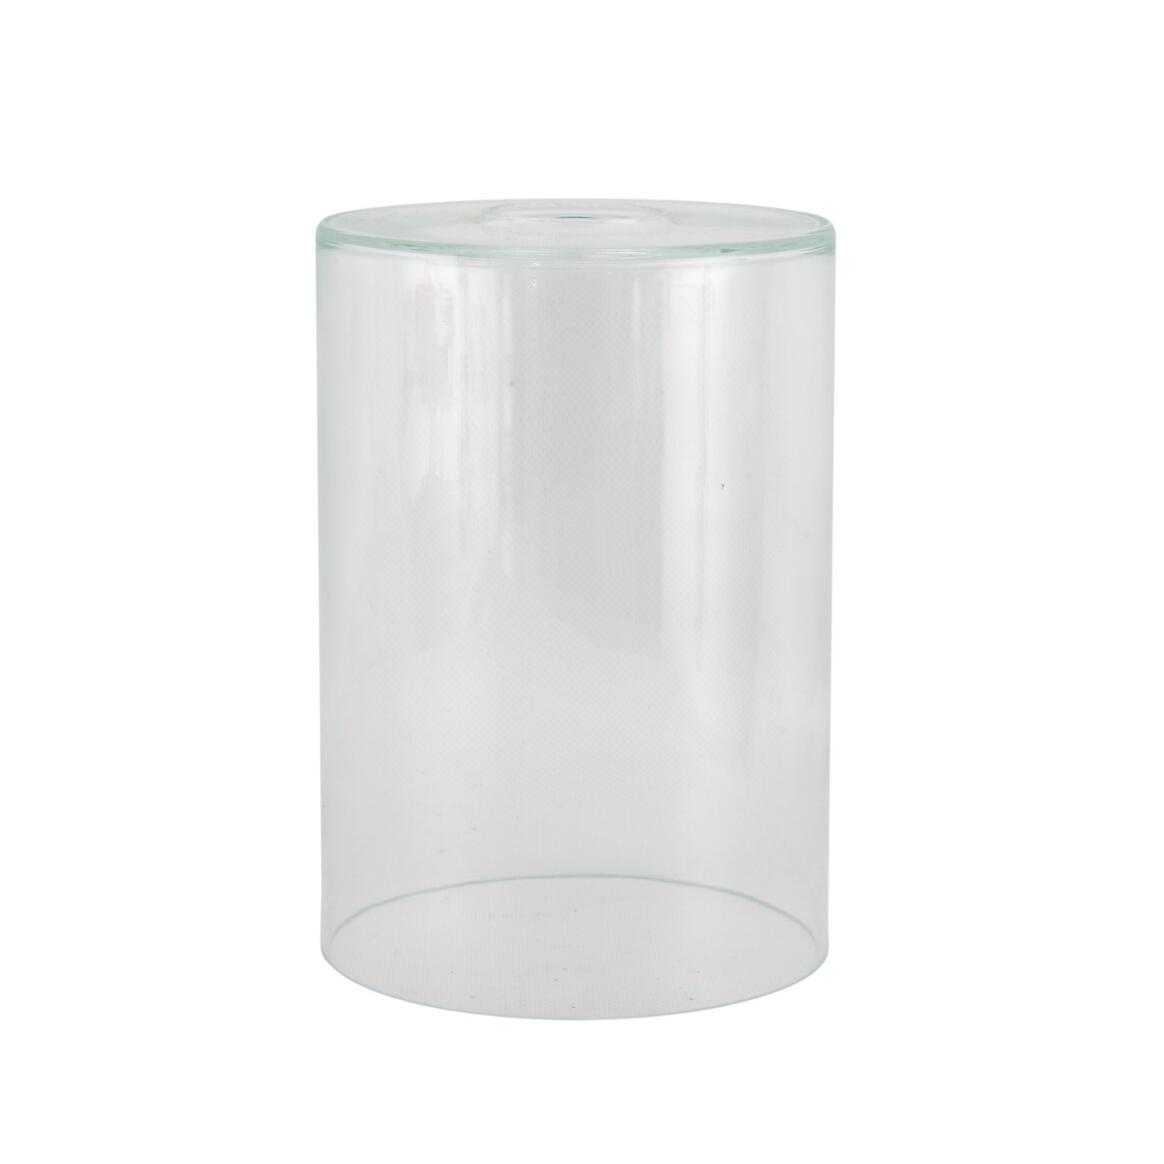 Cylinder clear glass lamp shade 14cm main product image